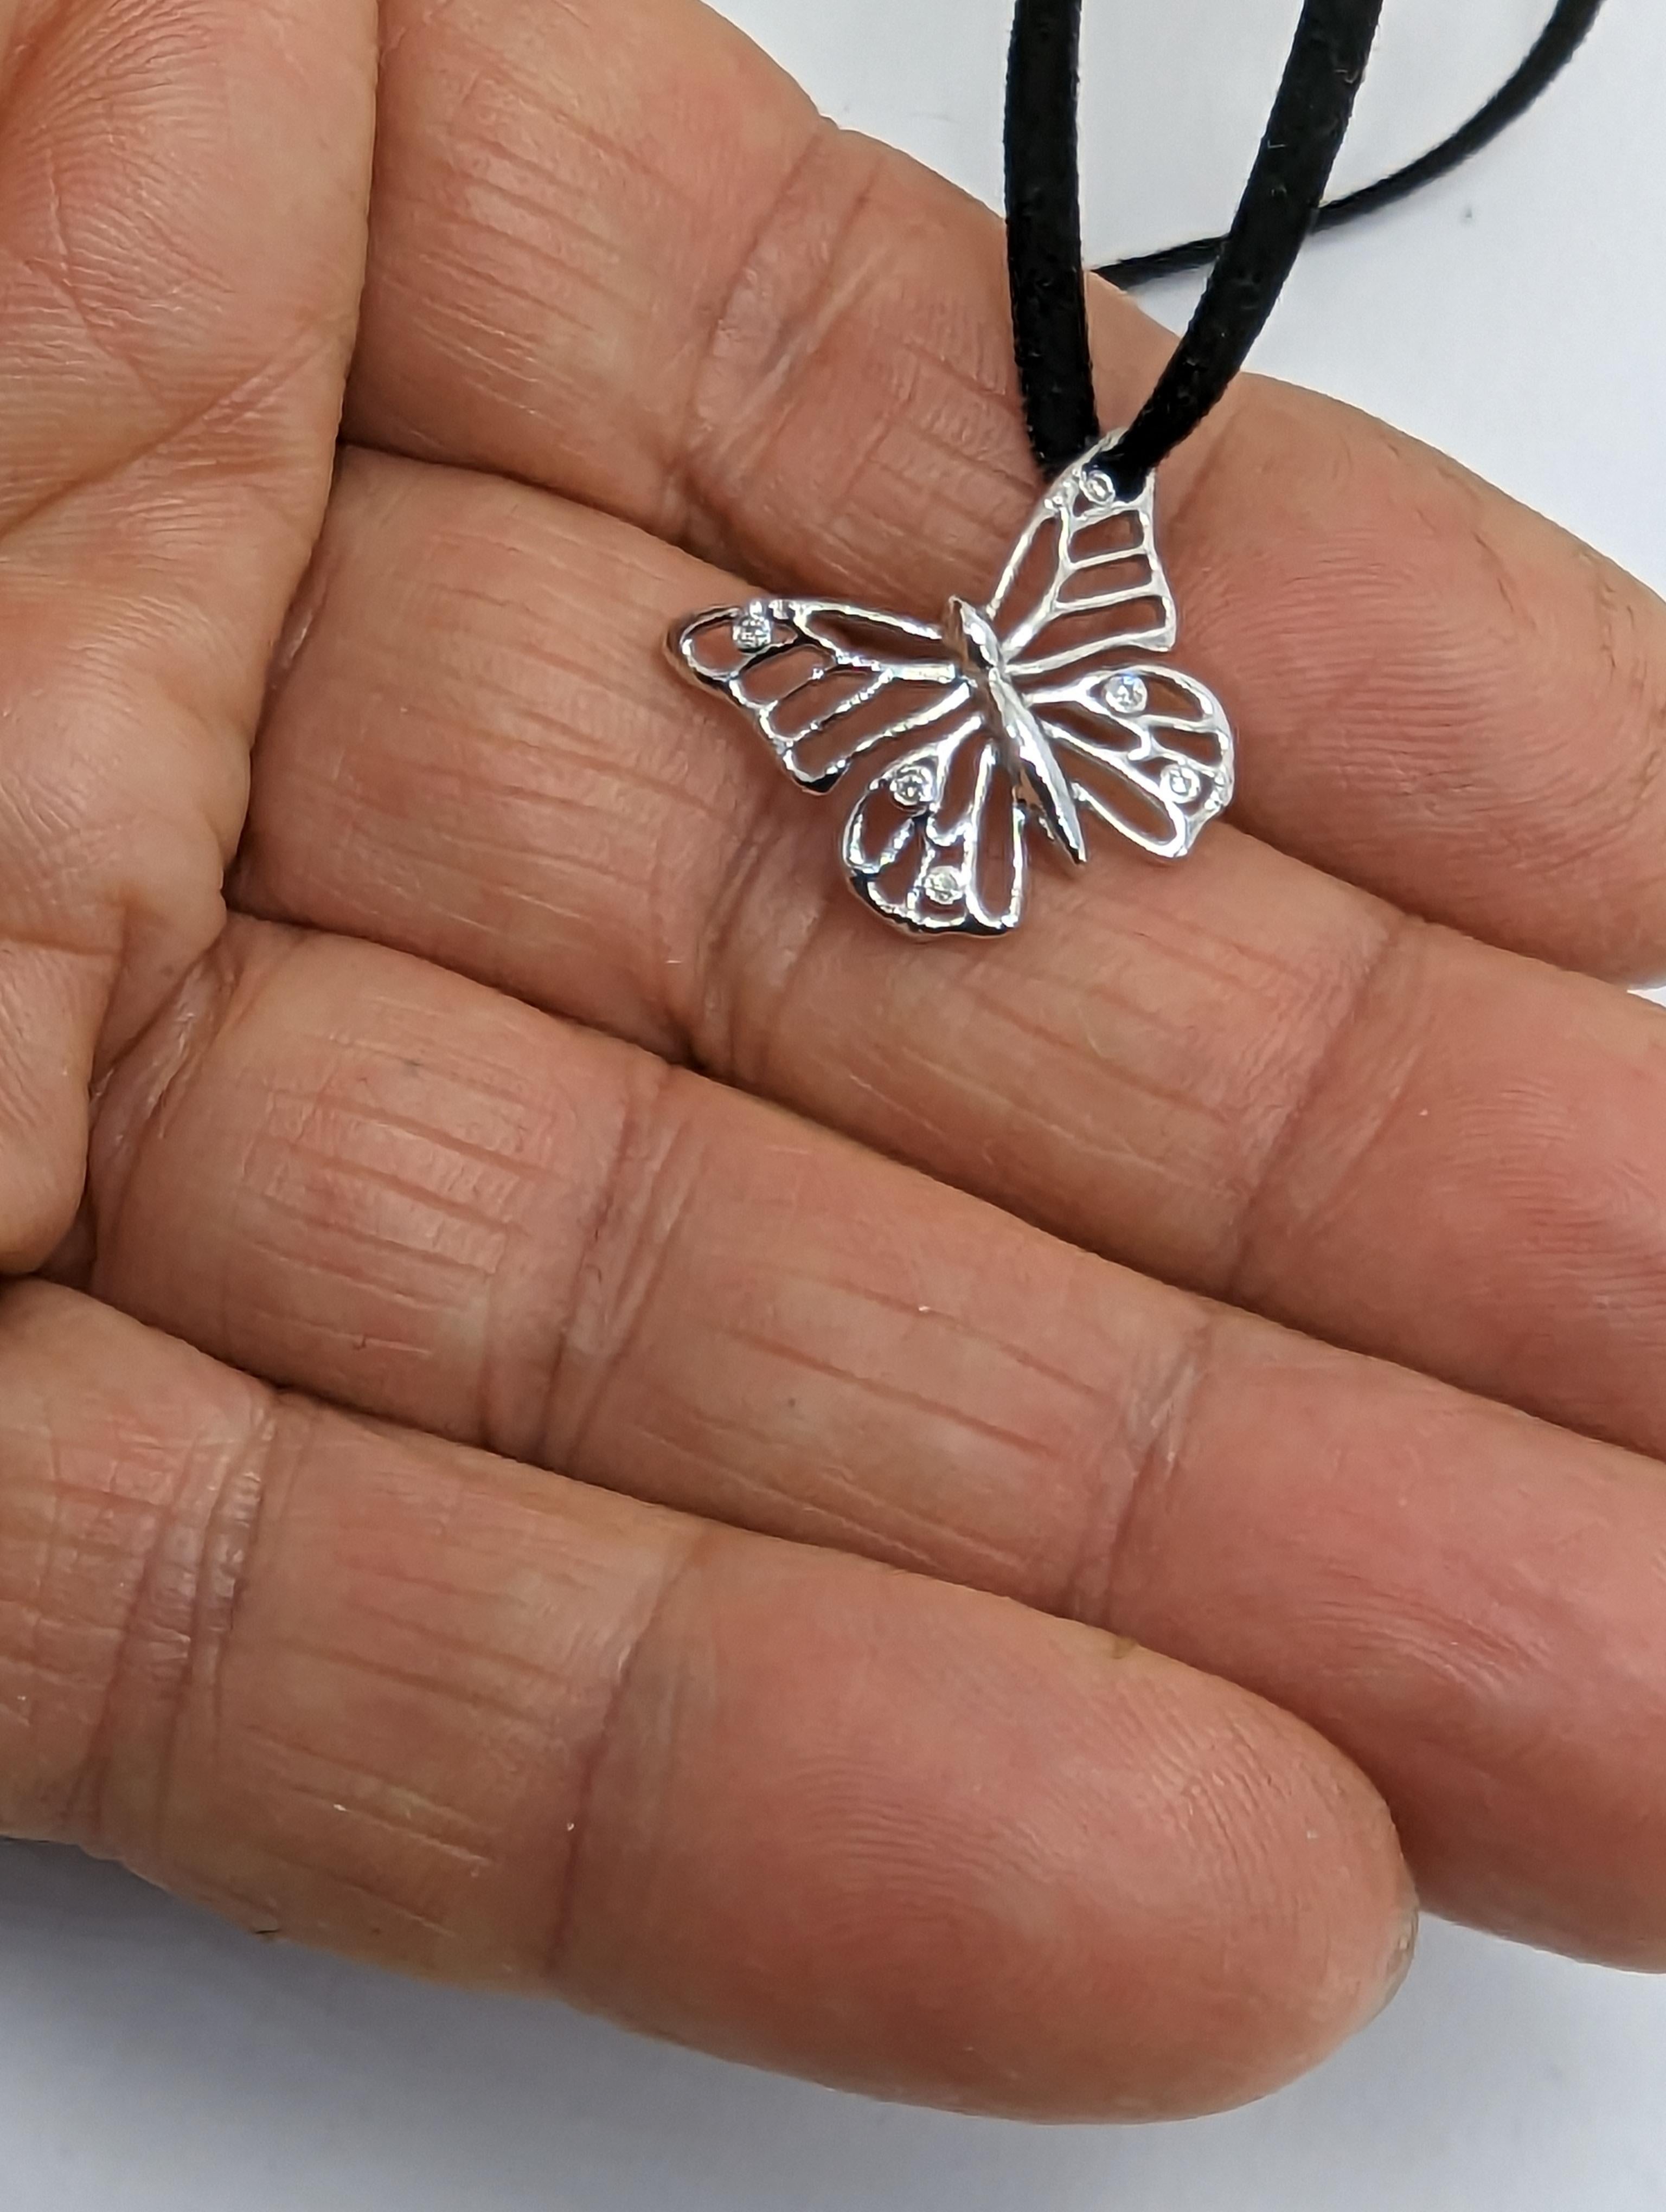 Platinum and Sterling Petite Monarch Butterfly and GIA Diamonds Pendant Necklace, Tiffany Designer, Thomas Kurilla sculpted this butterfly pendant for the new Fall season. Butterflies have always captured the imagination of designers with their